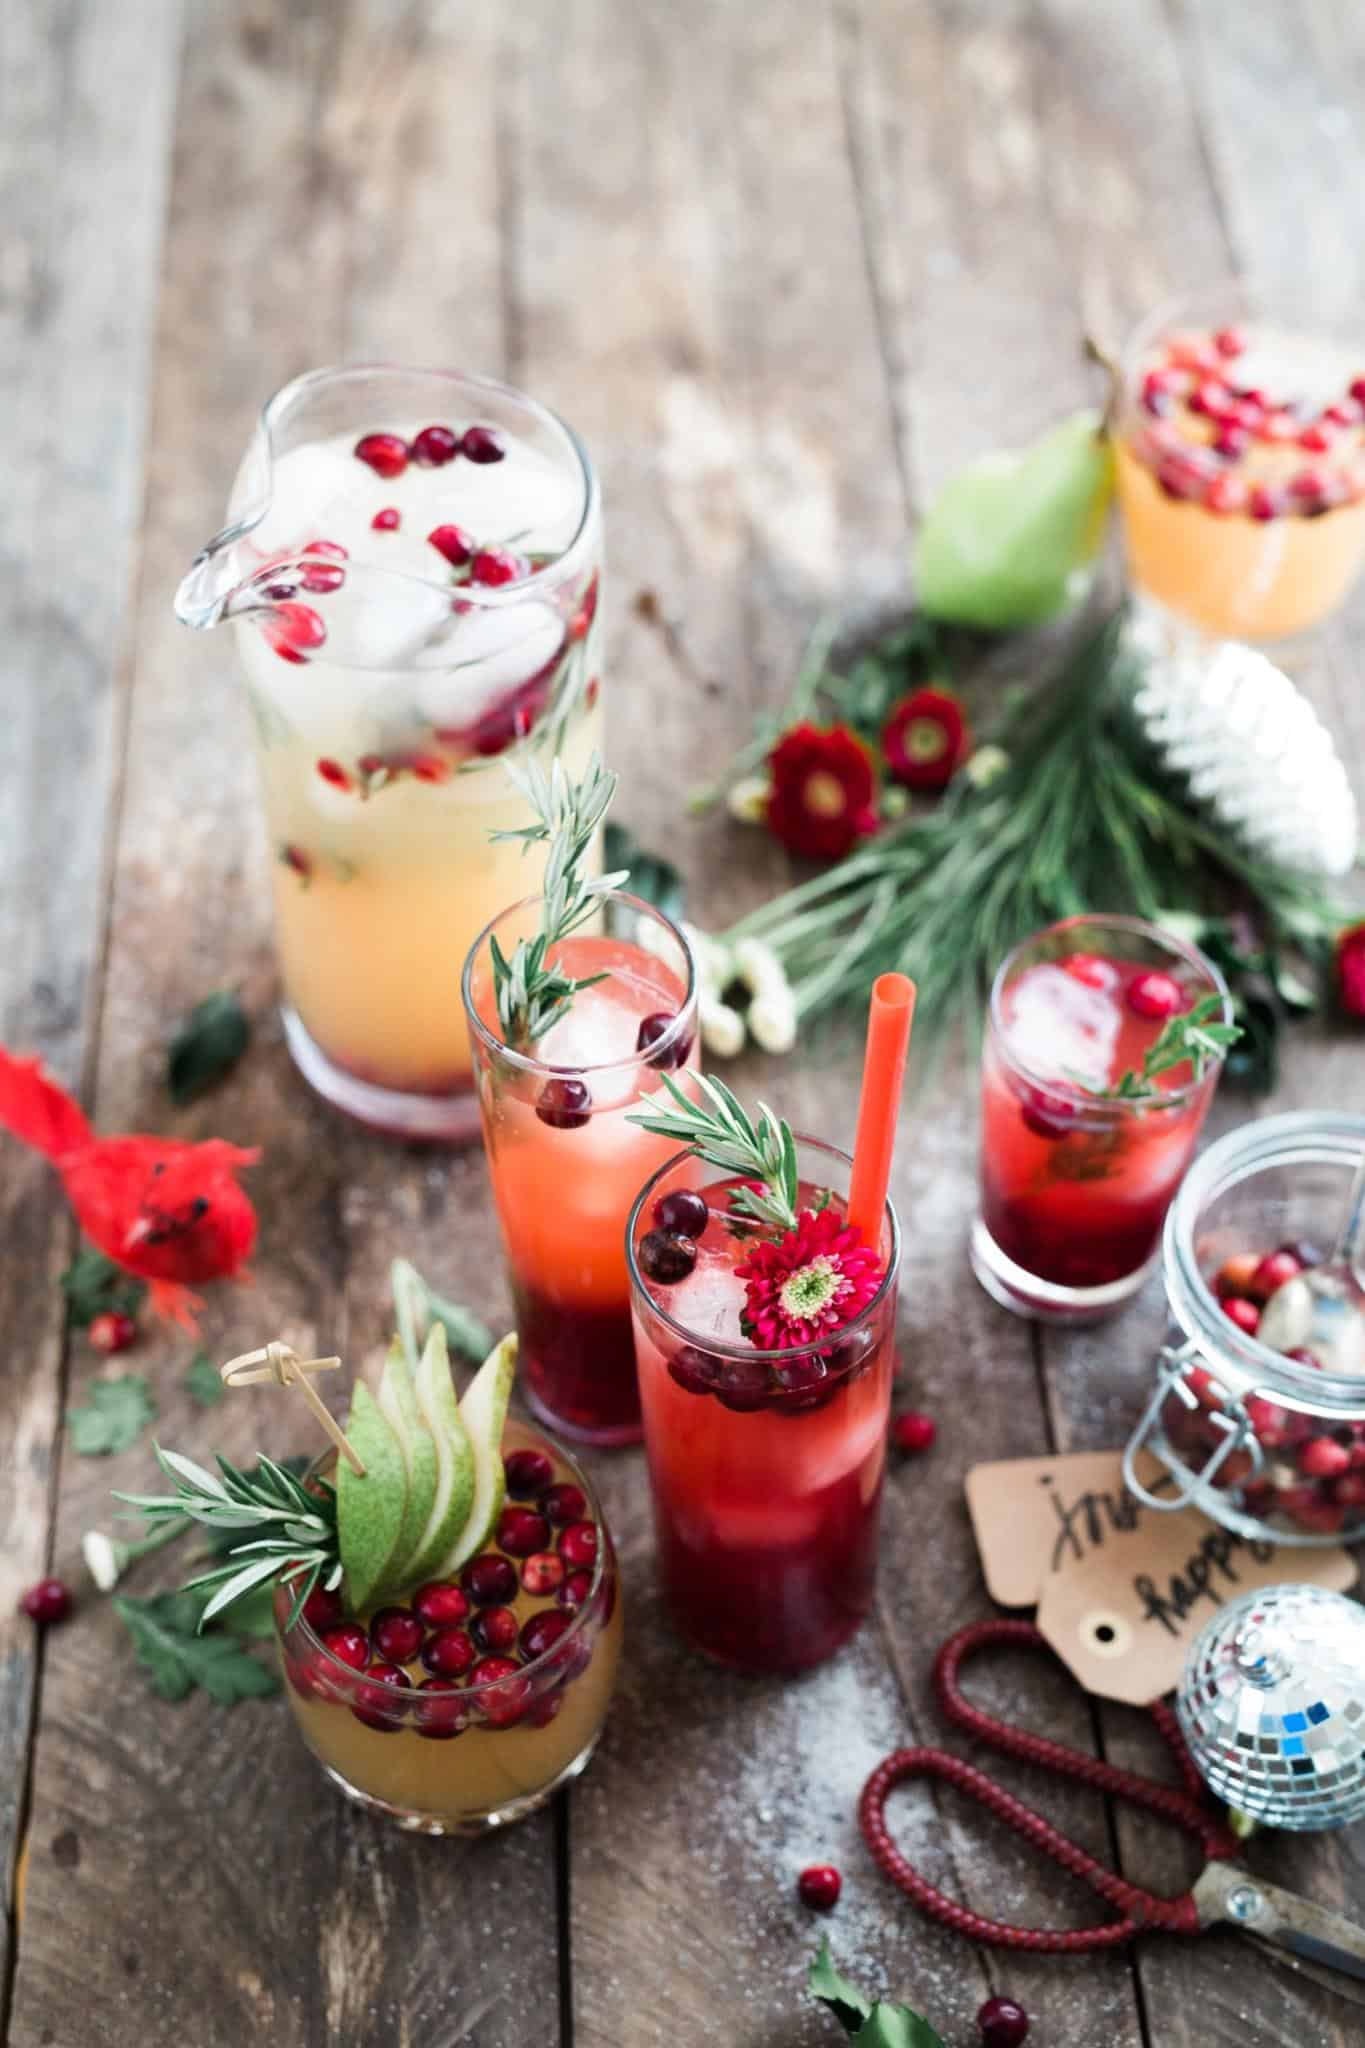 Arrangement of Holiday drinks and garnishments on a wooden table.